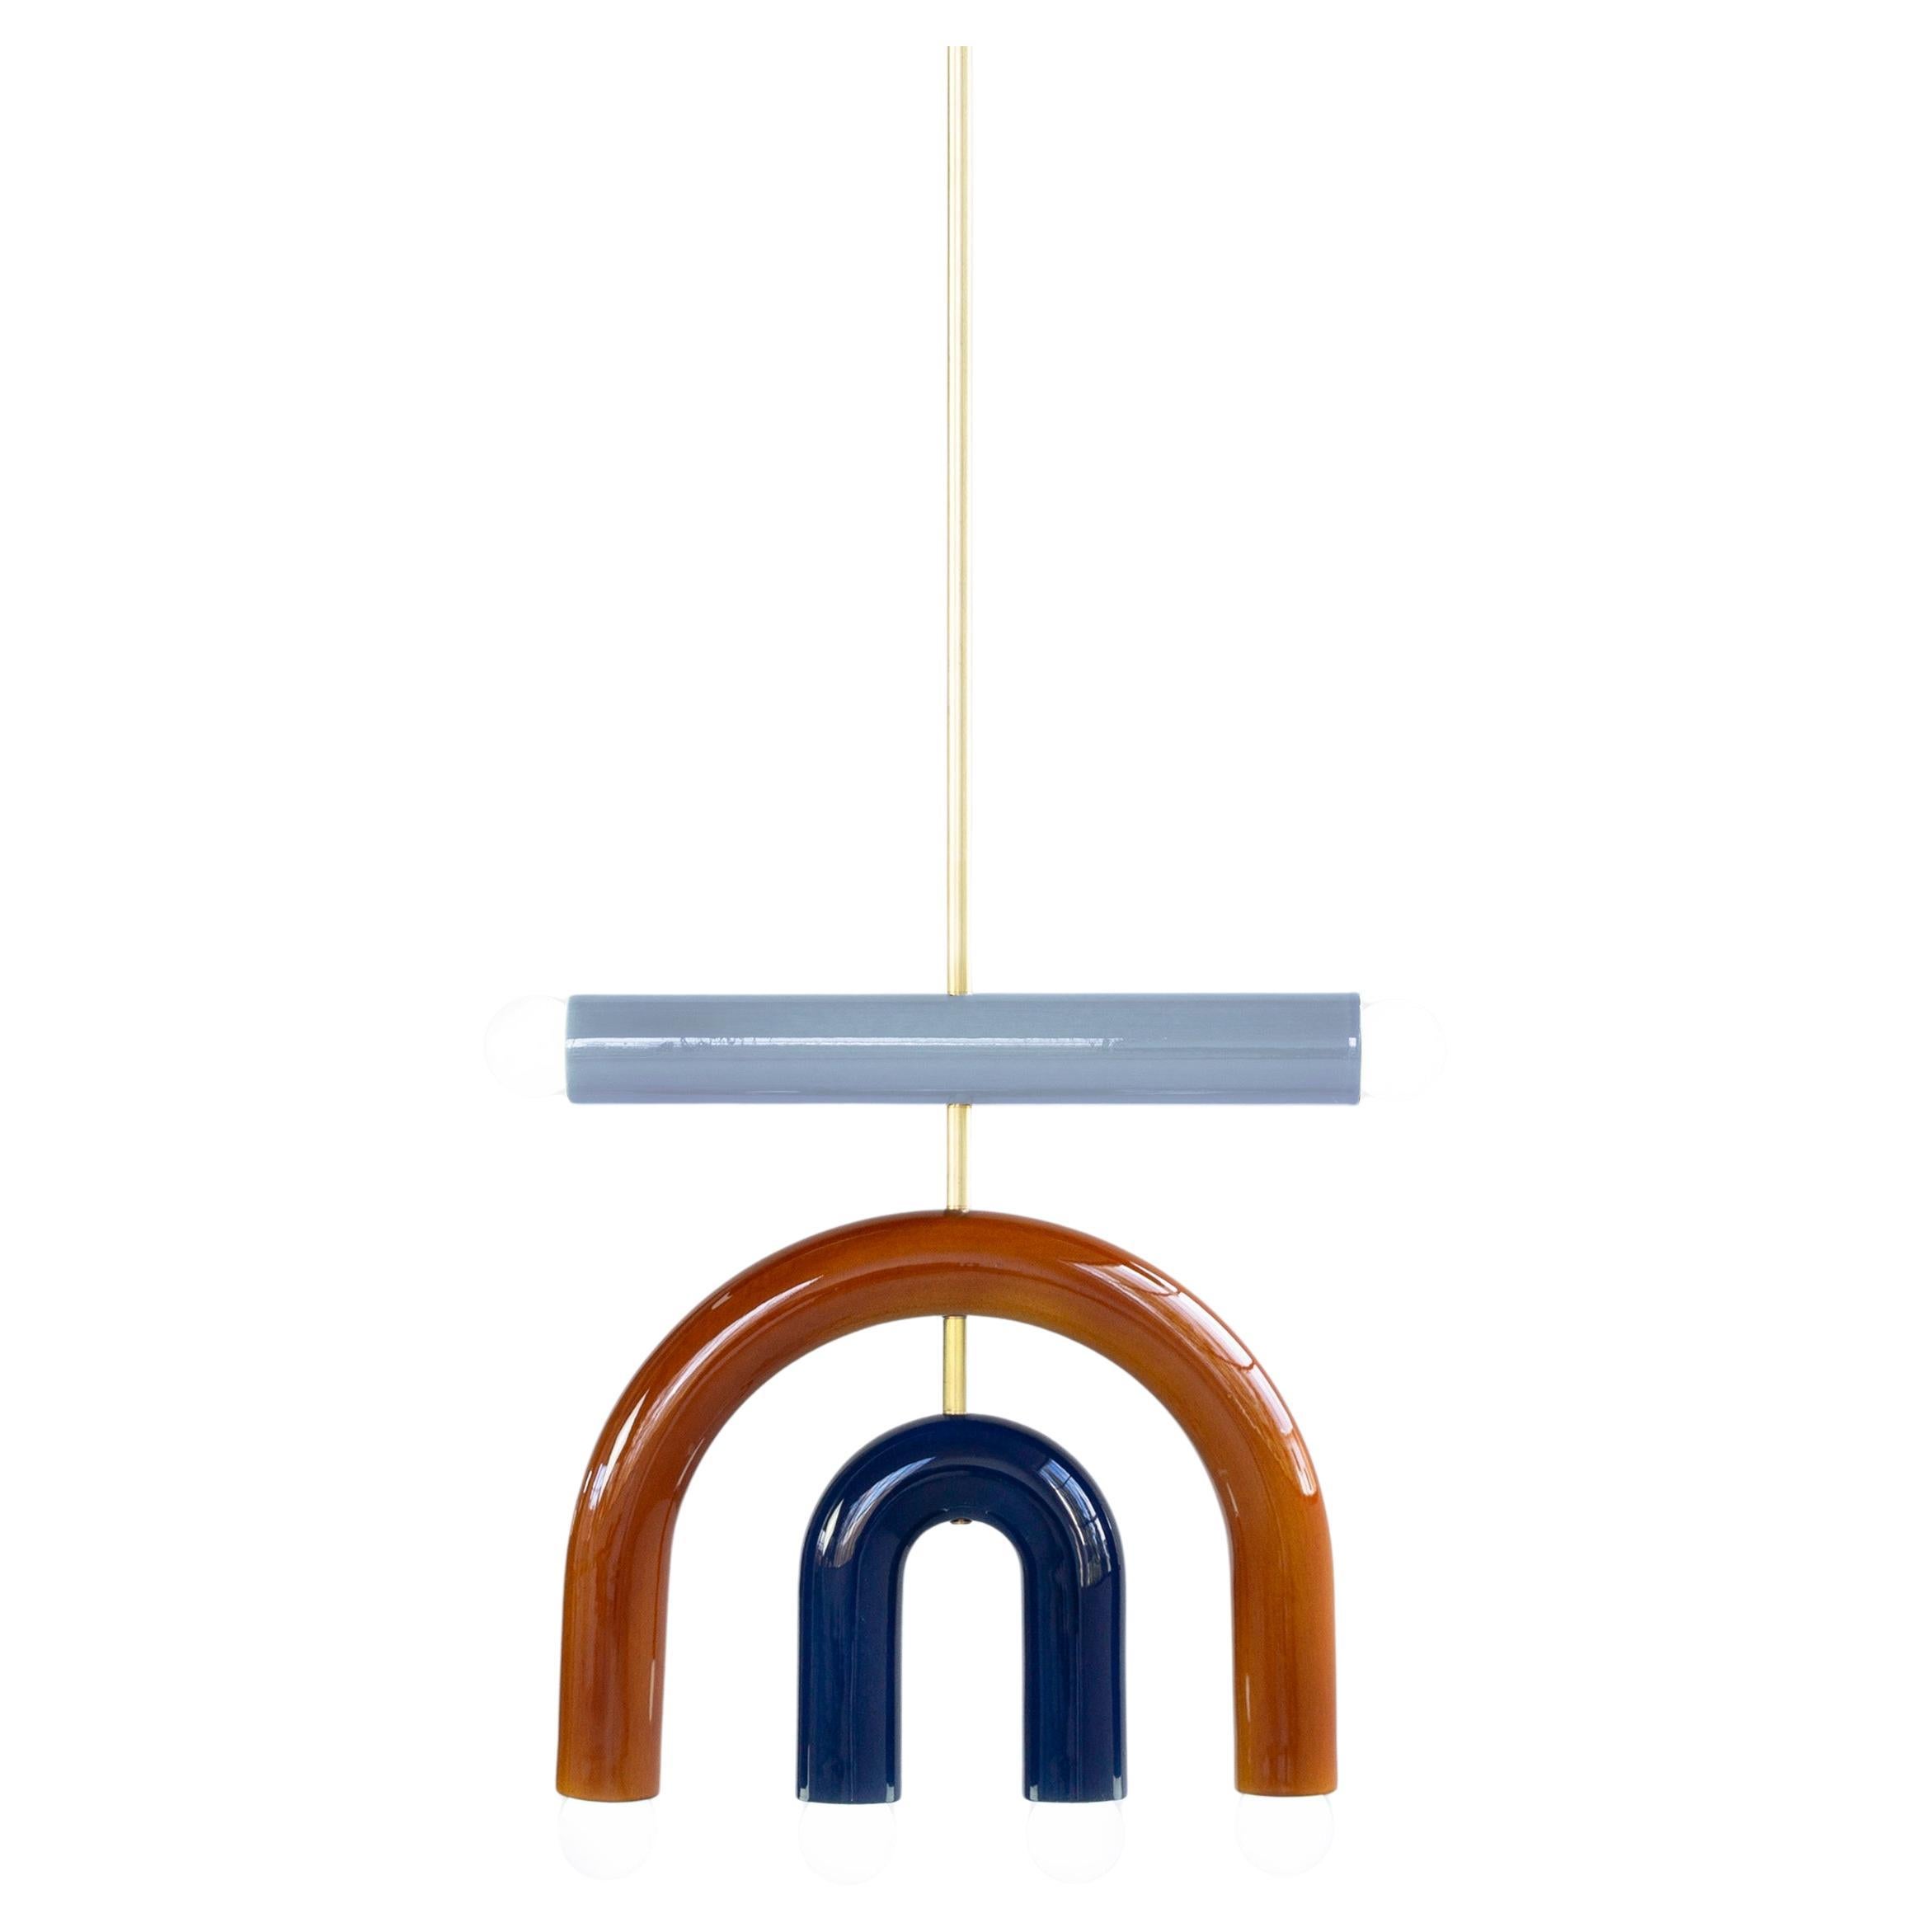 TRN D1 Pendant lamp / ceiling lamp / chandelier 
Designer: Pani Jurek

Model shown: TRN D1, Green Line + 2 arches Brown
Dimensions: H. 37.5 x 35 x 5 cm

Bulb (not included): E27/E26, compatible with US electric system

Materials: Hand glazed ceramic